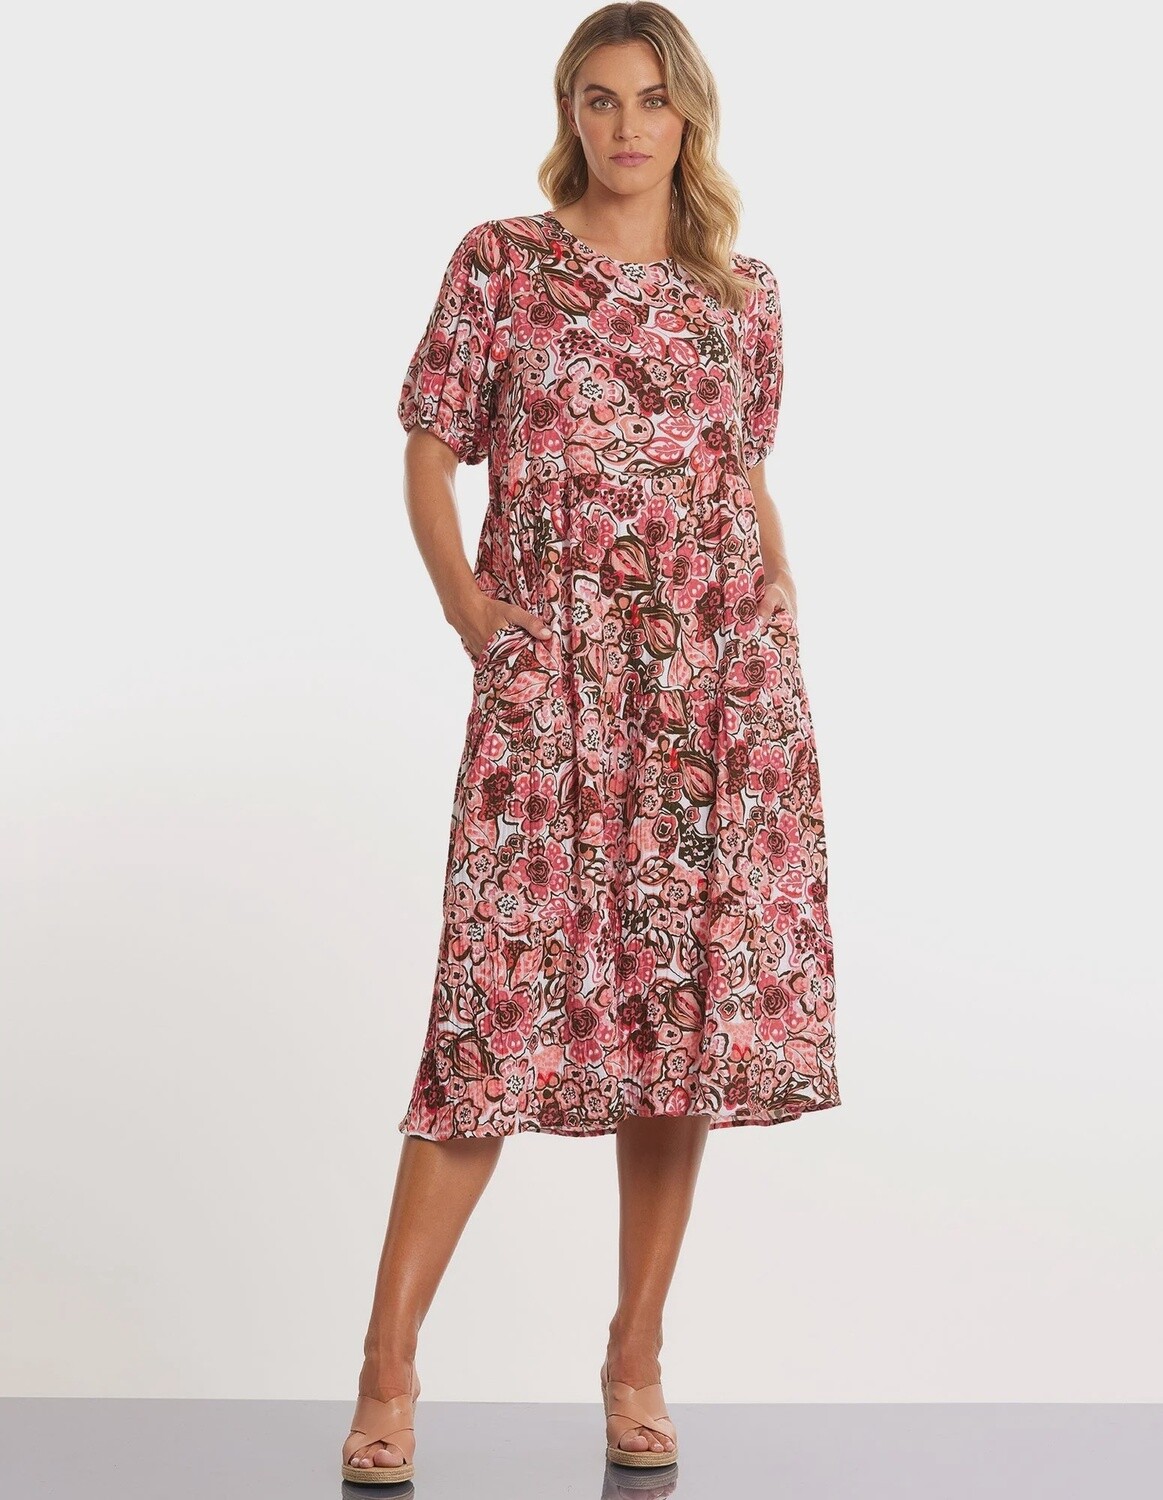 Marco Polo Floral Tapestry Dress, Size: 14